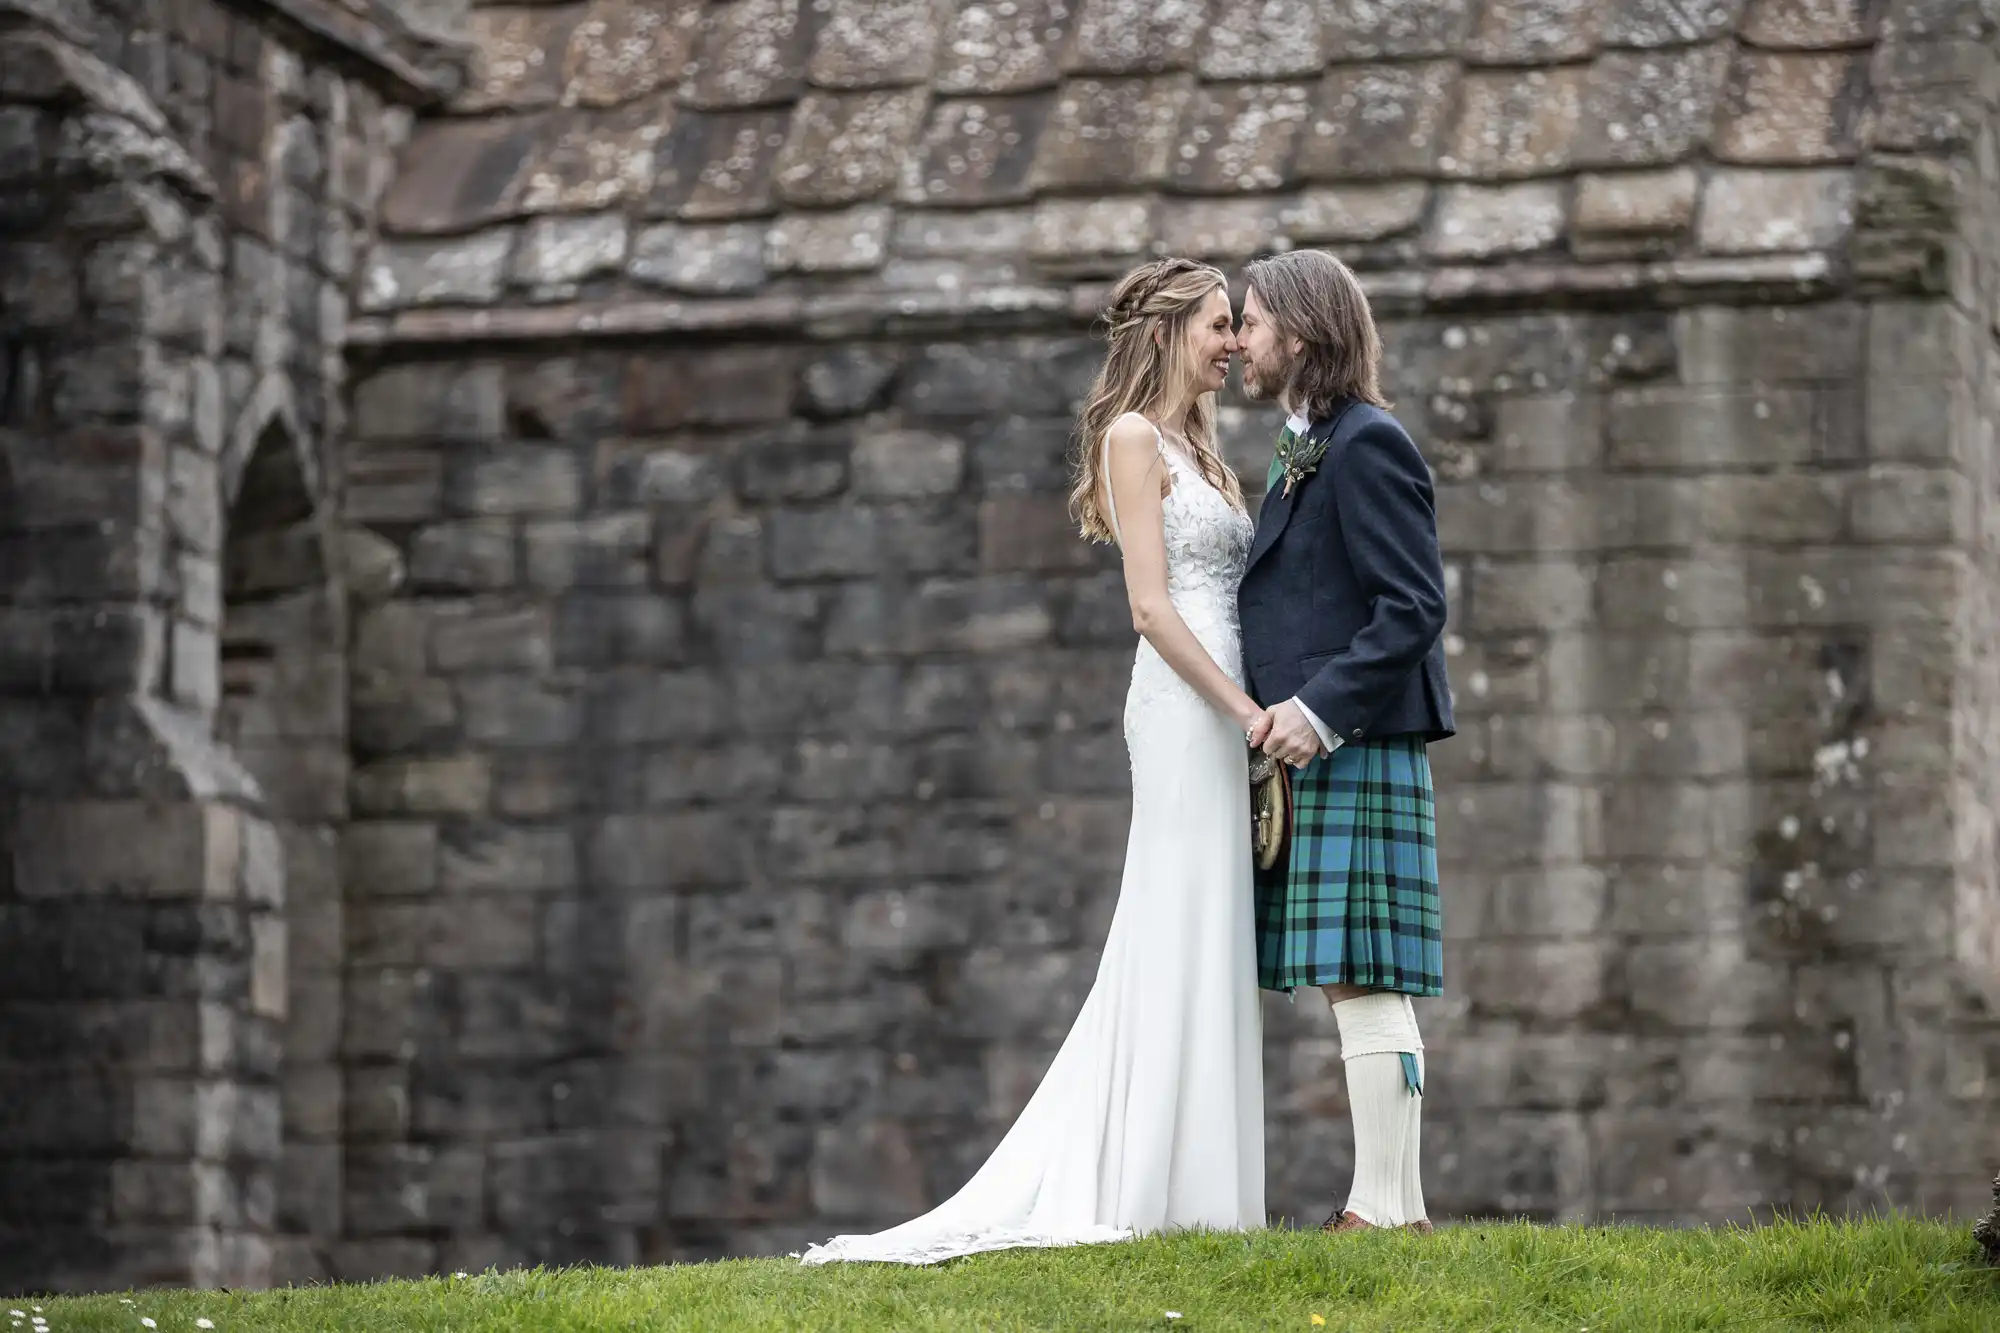 A couple stands holding hands and looking at each other in front of a stone building. The woman is in a white dress, and the man is in a traditional Scottish kilt.